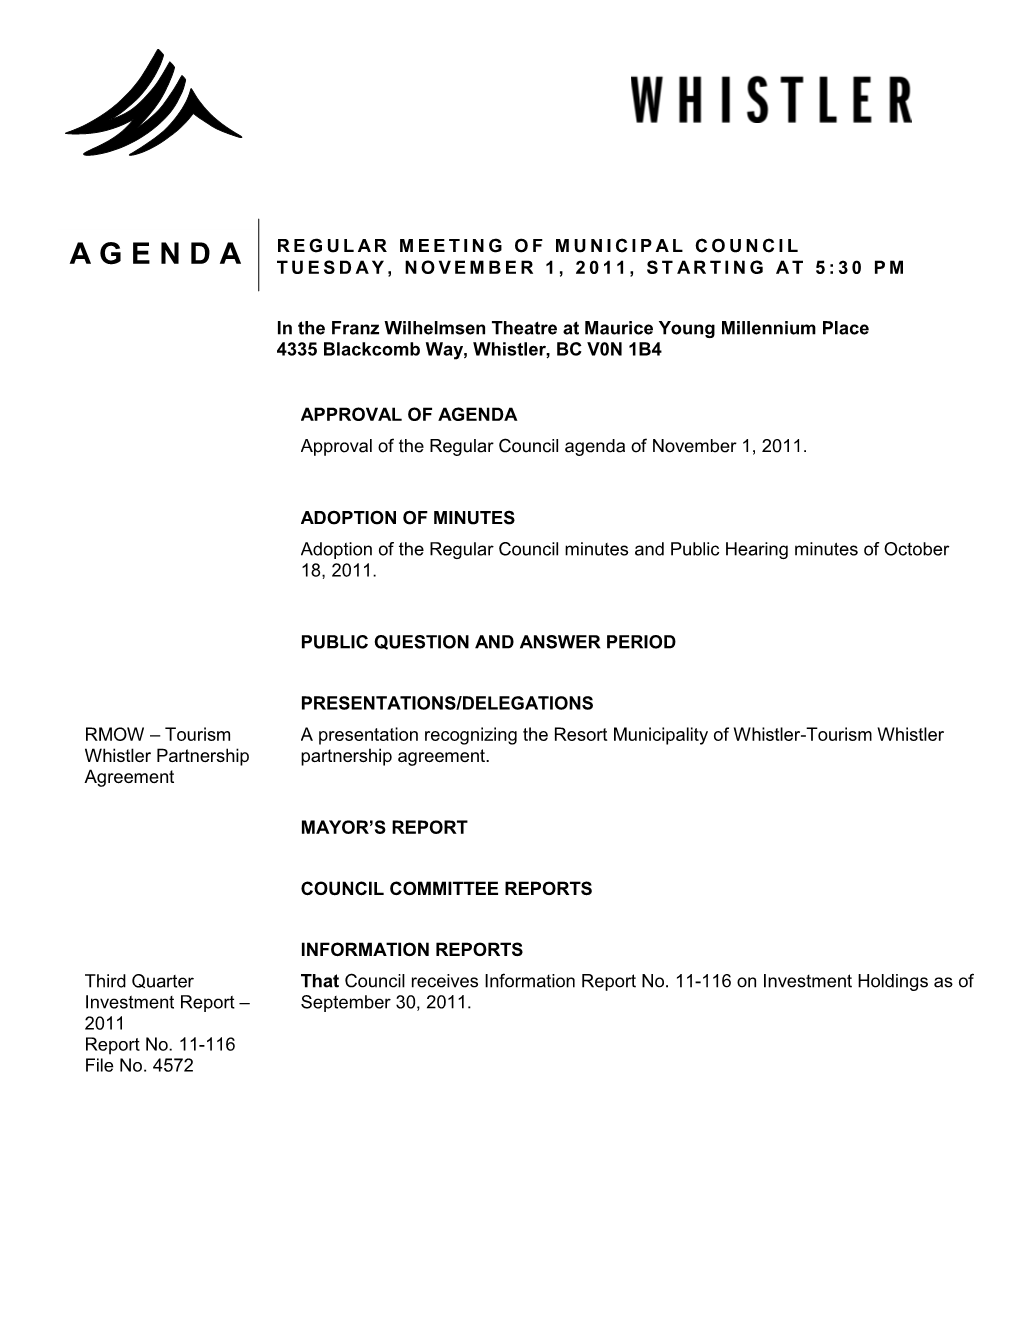 APPROVAL of AGENDA Approval of the Regular Council Agenda of November 1, 2011